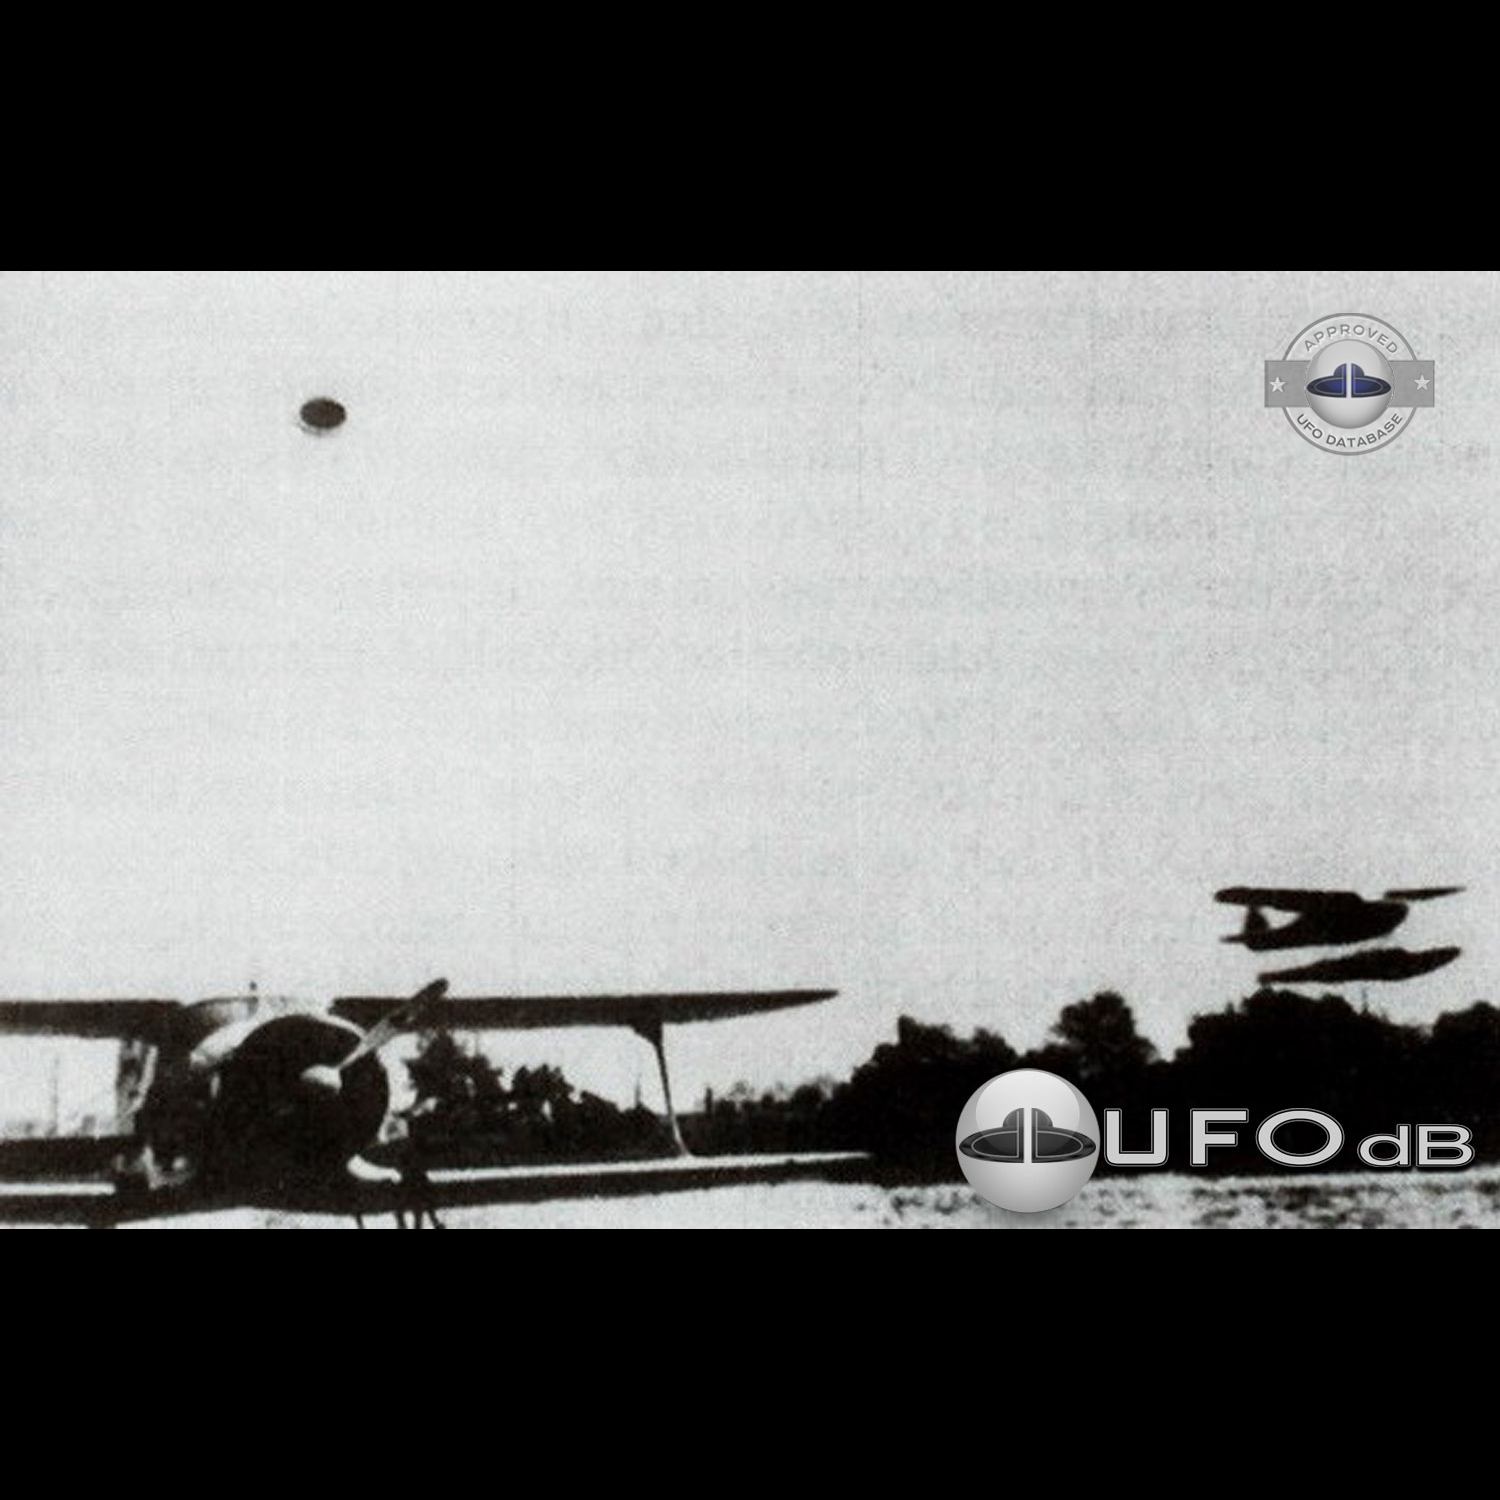 Under the UFO we can see 2 aircraft on the shore of Anchorage Alaska UFO Picture #113-1